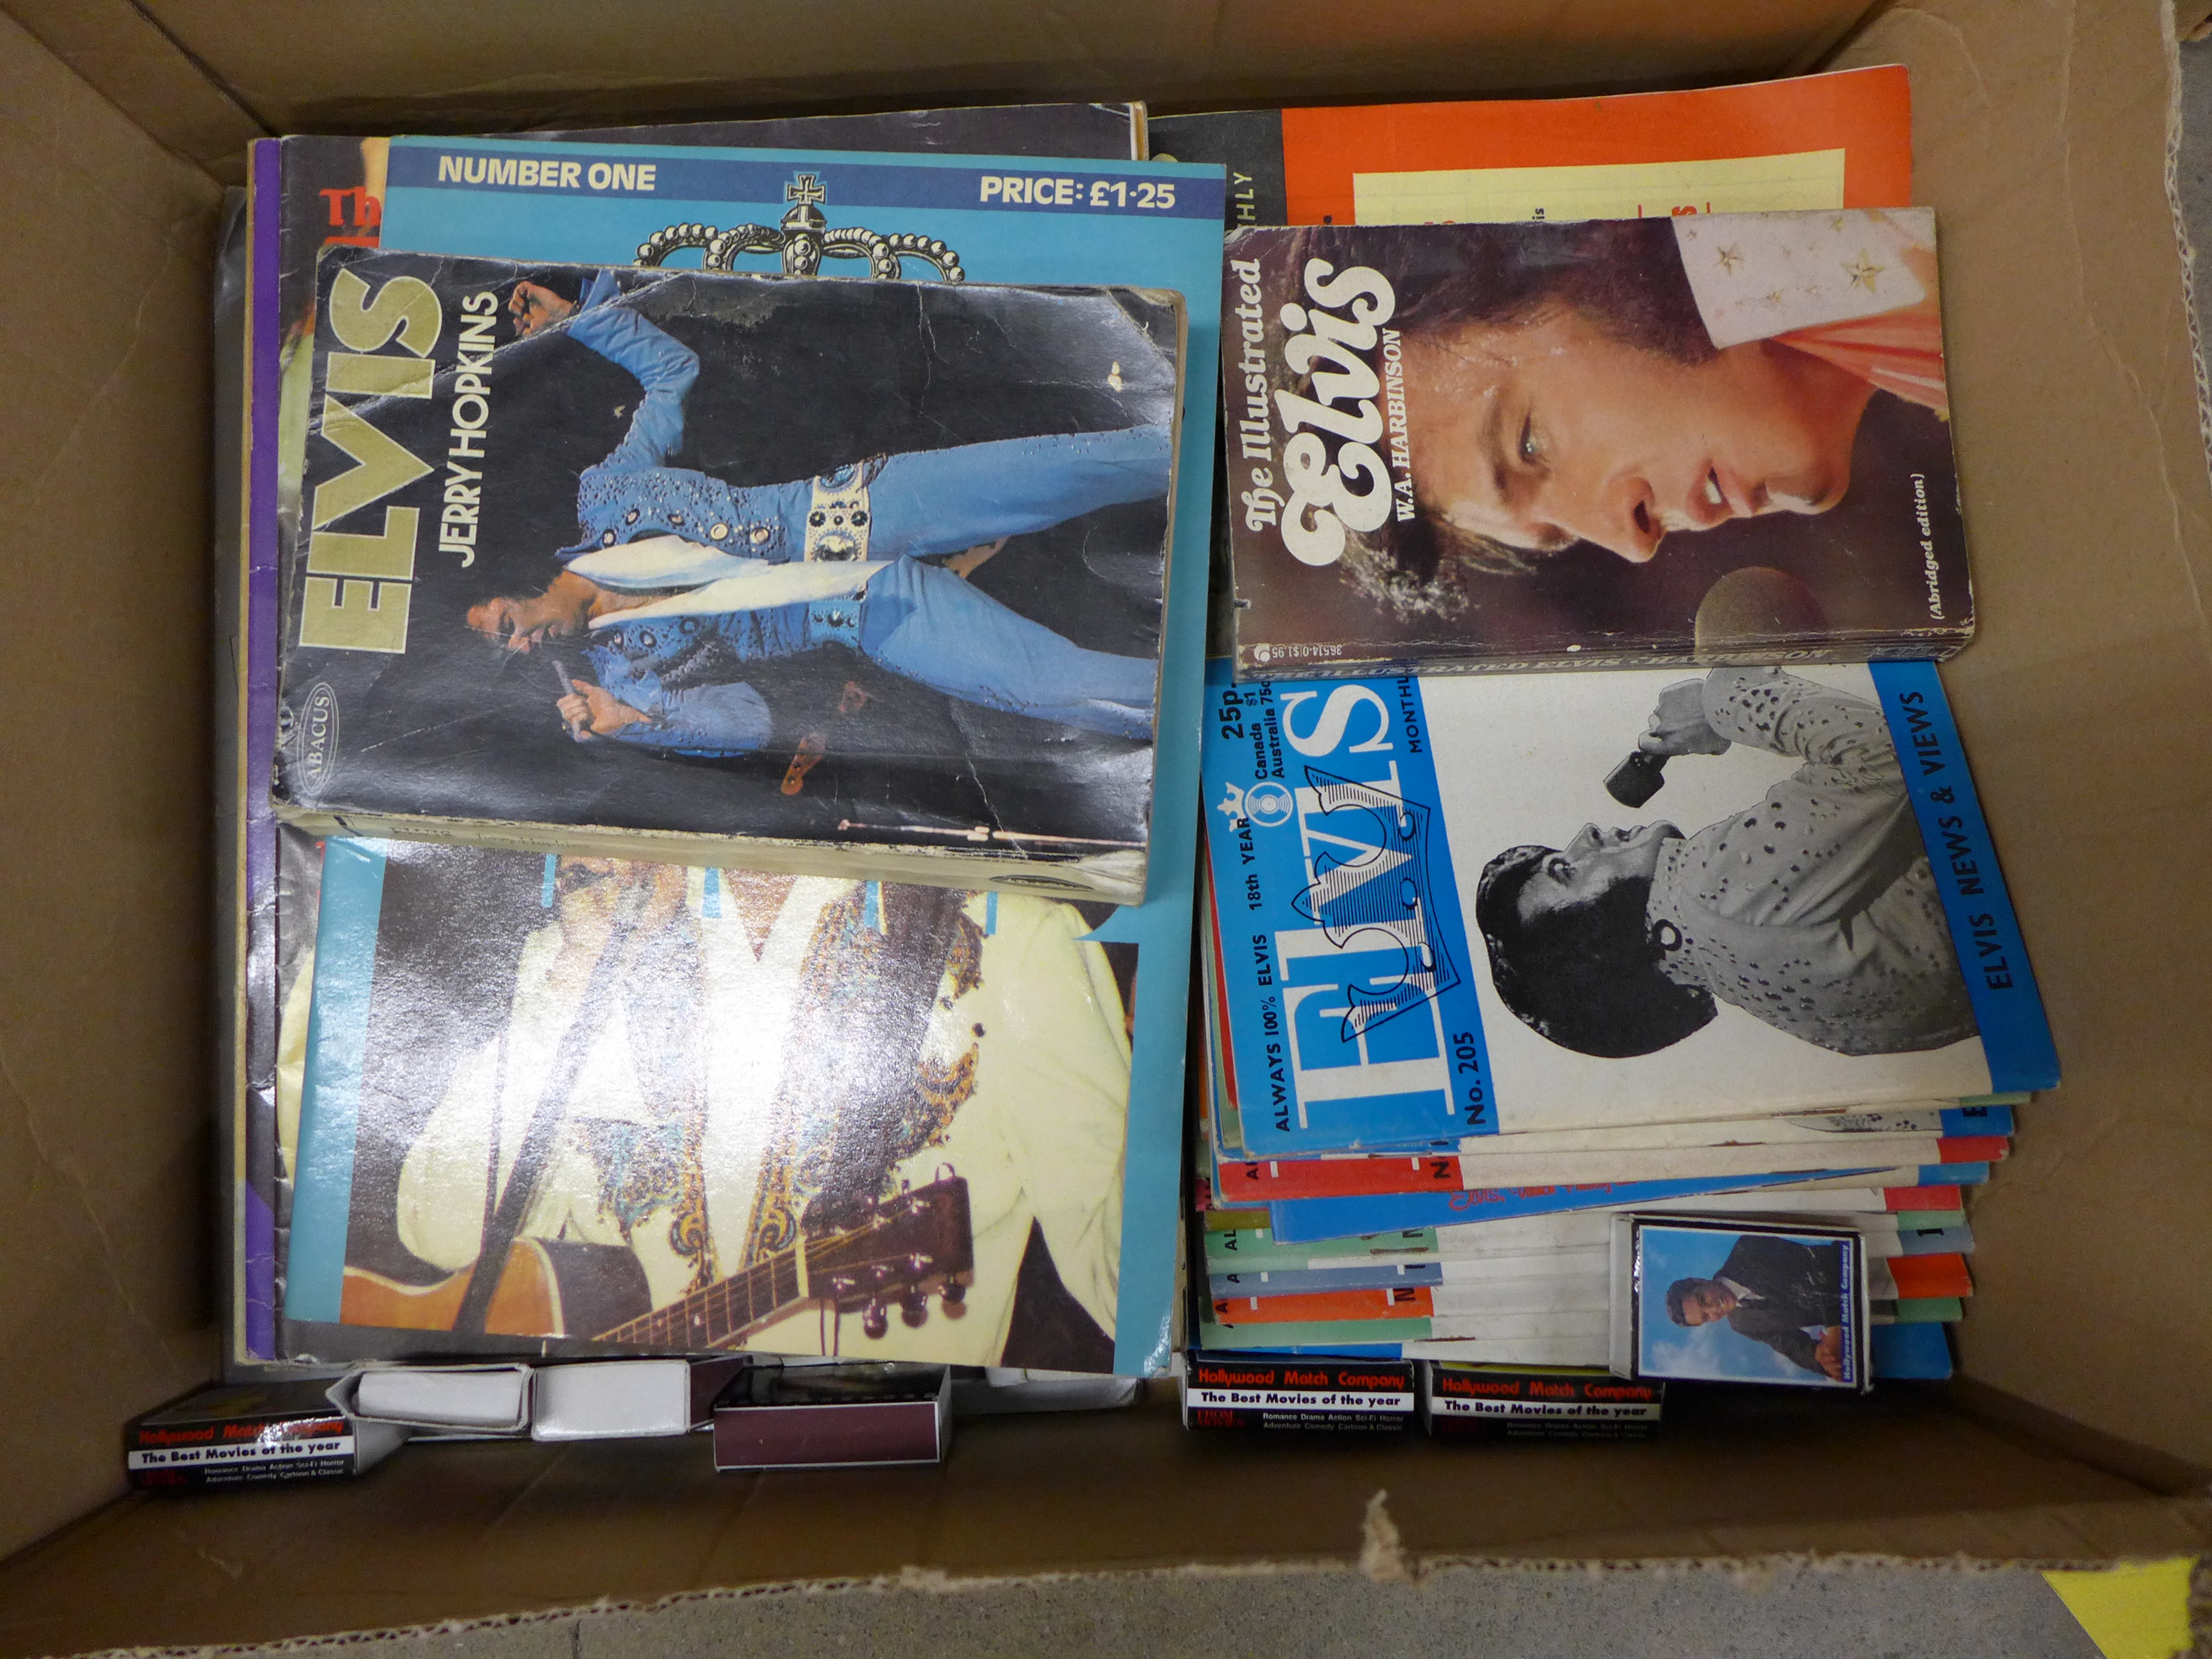 A collection of Elvis books, magazines, etc., including Elvis Weekly and an Elvis poster**PLEASE